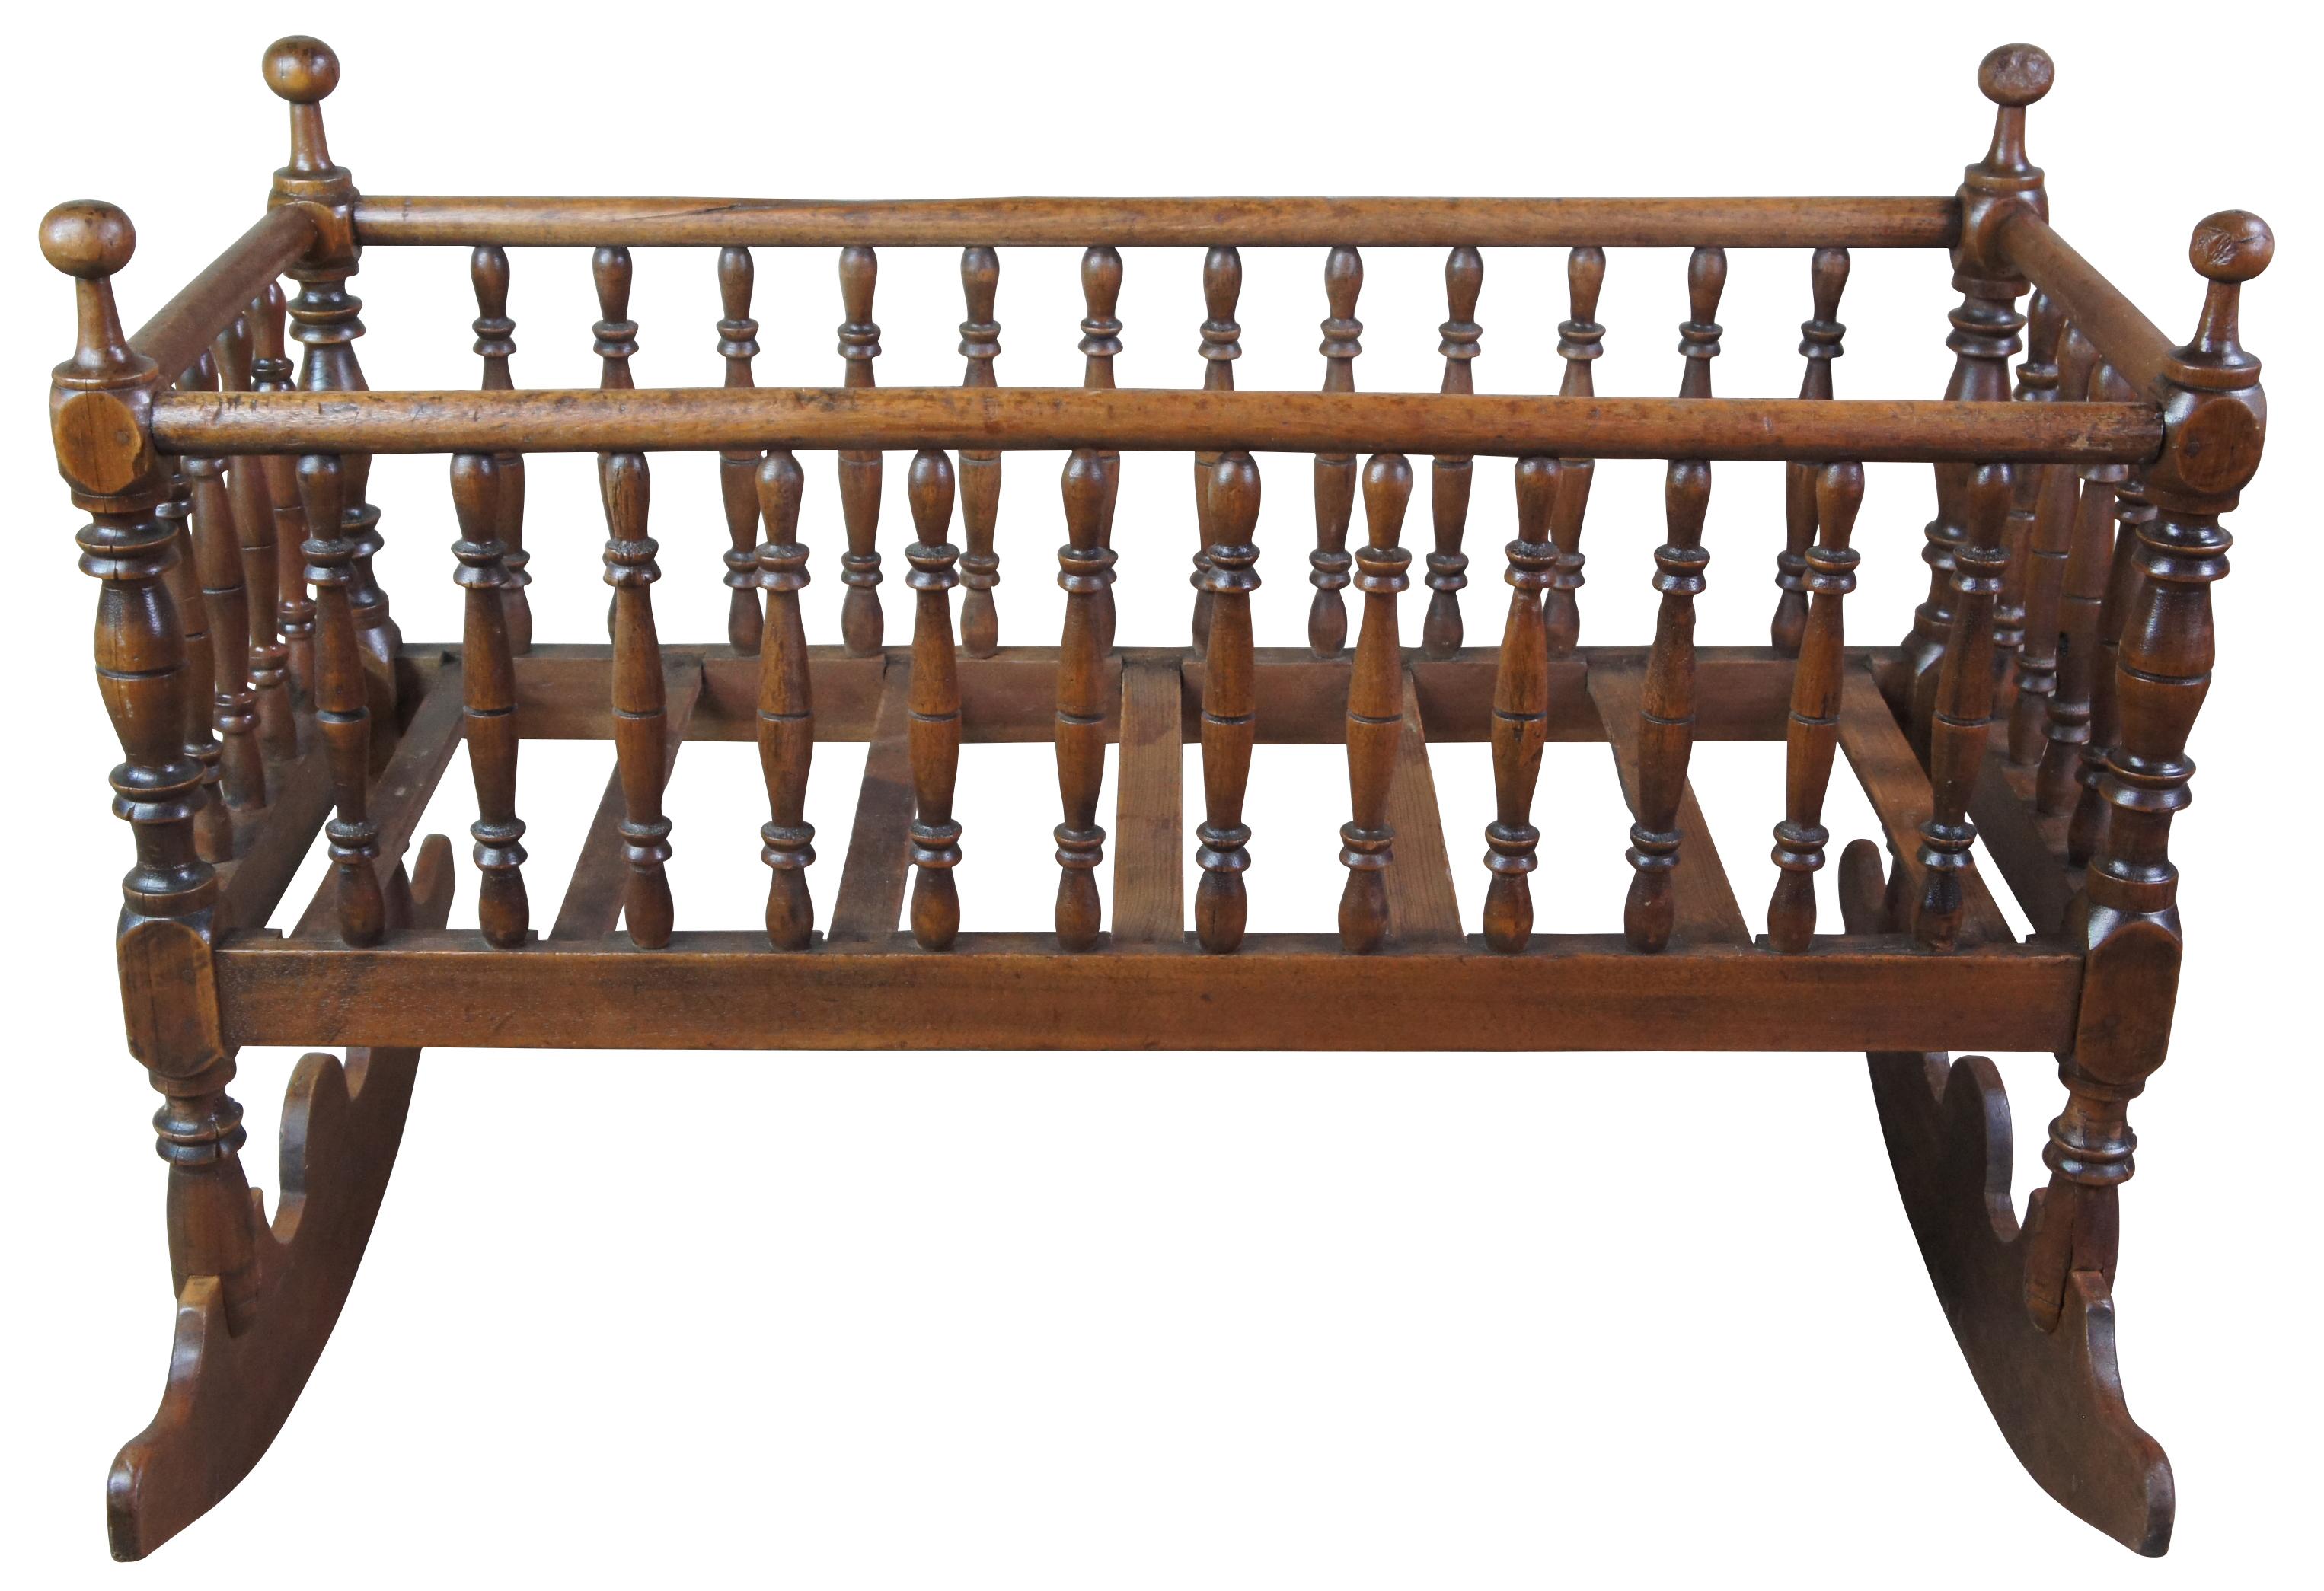 Antique hand turned spindle rocking cradle or bassinet. Made from walnut with a beautiful shape and form. 

29.5